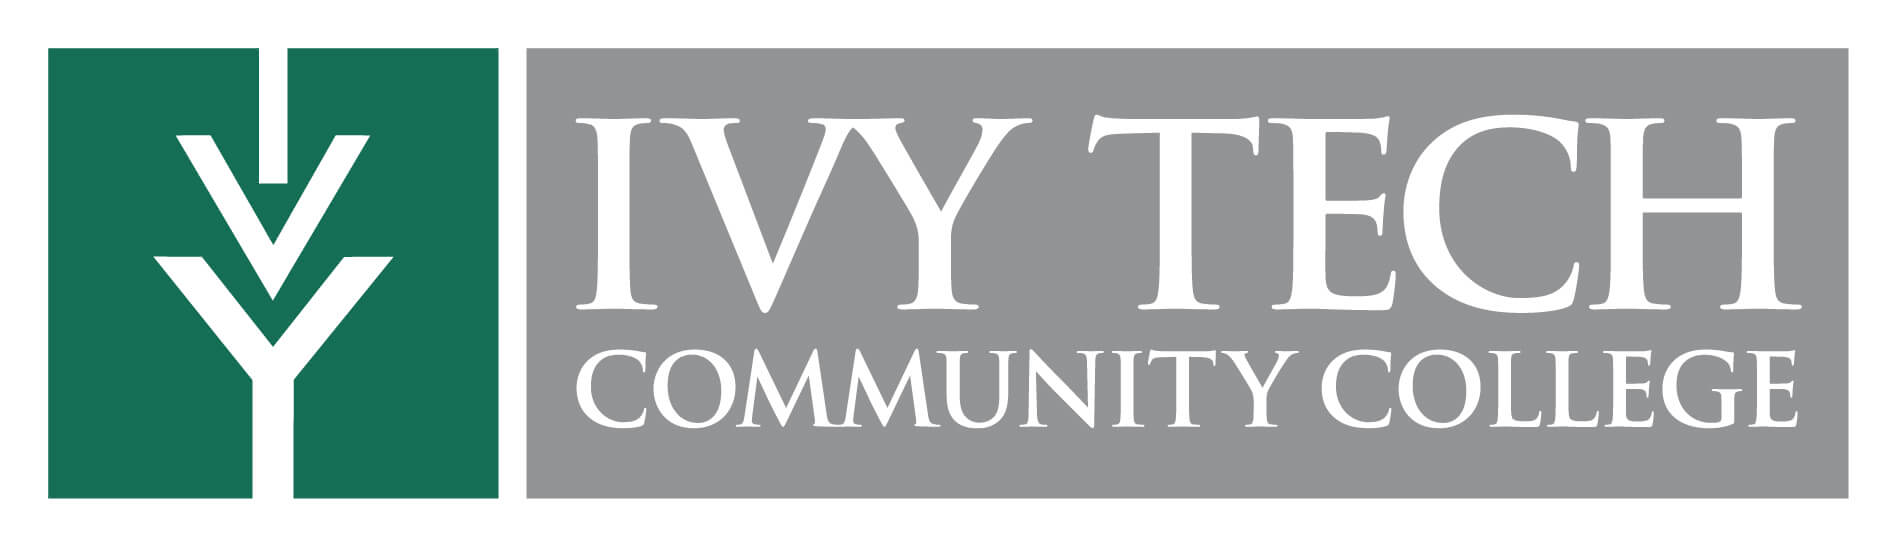 Ivy Tech Community College - Online Paralegal Degree Center